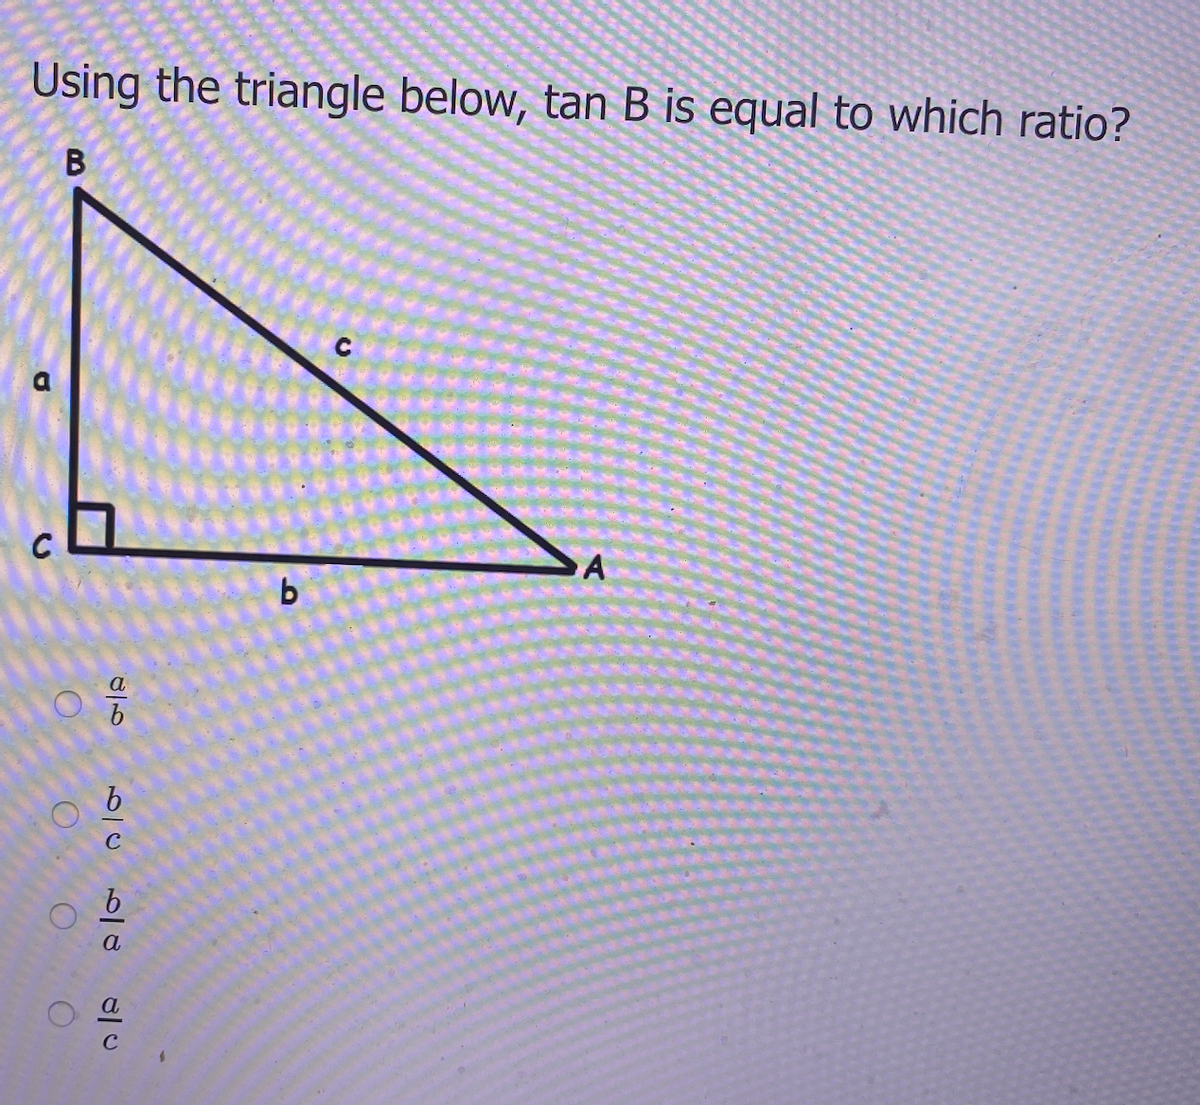 Using the triangle below, tan B is equal to which ratio?
C
a
C.
